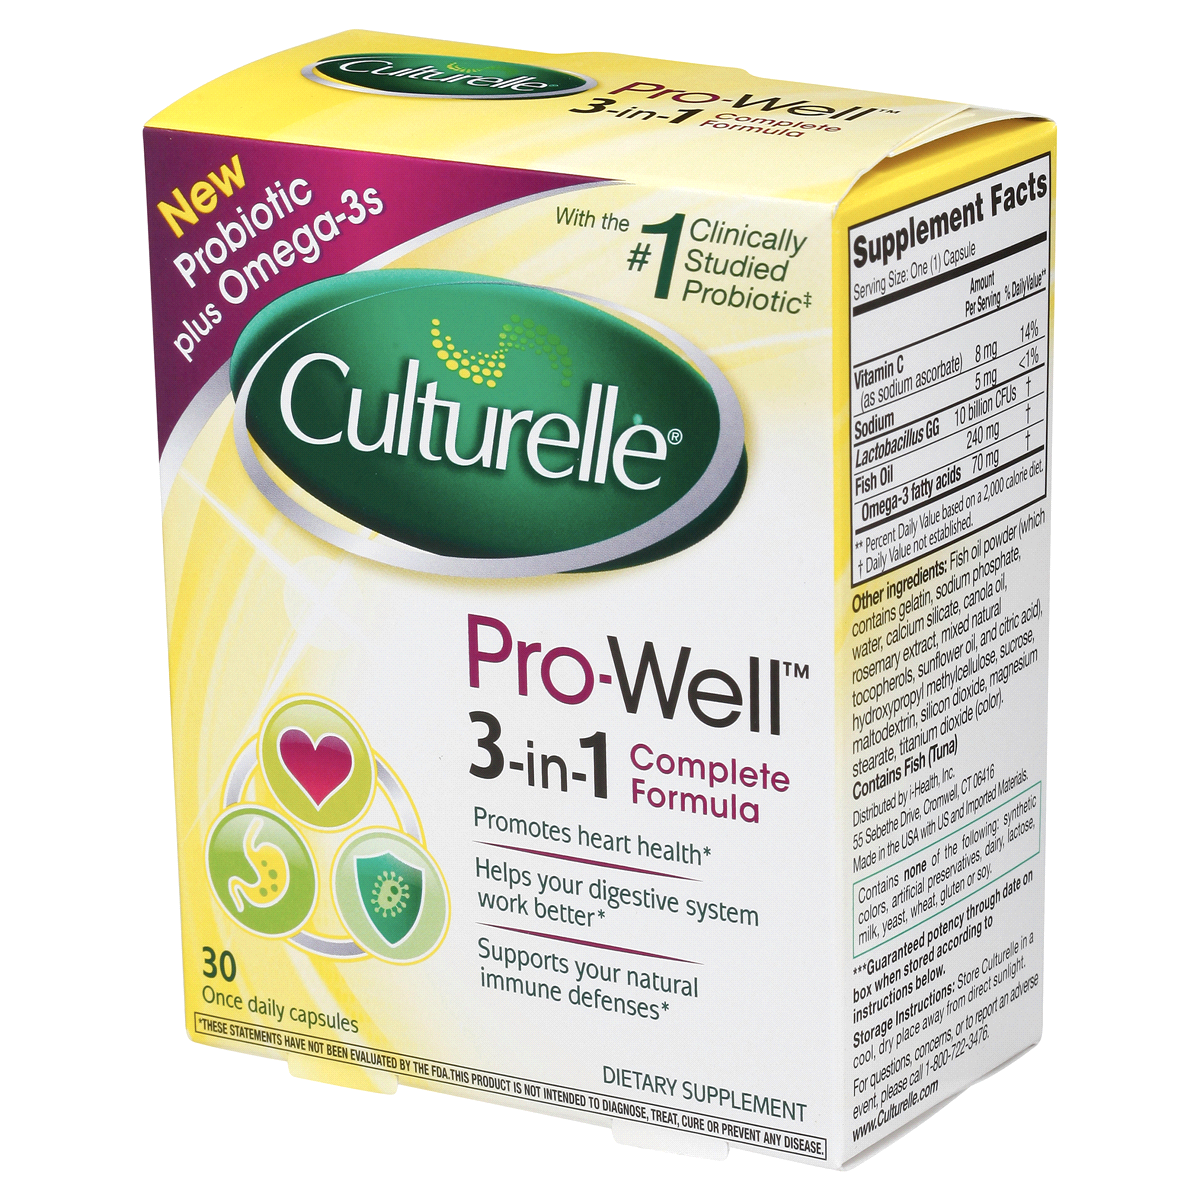 slide 6 of 11, Culturelle Prowell 3in1 Probiotic Complete Formula Dietary Supplement Capsules, 30 ct